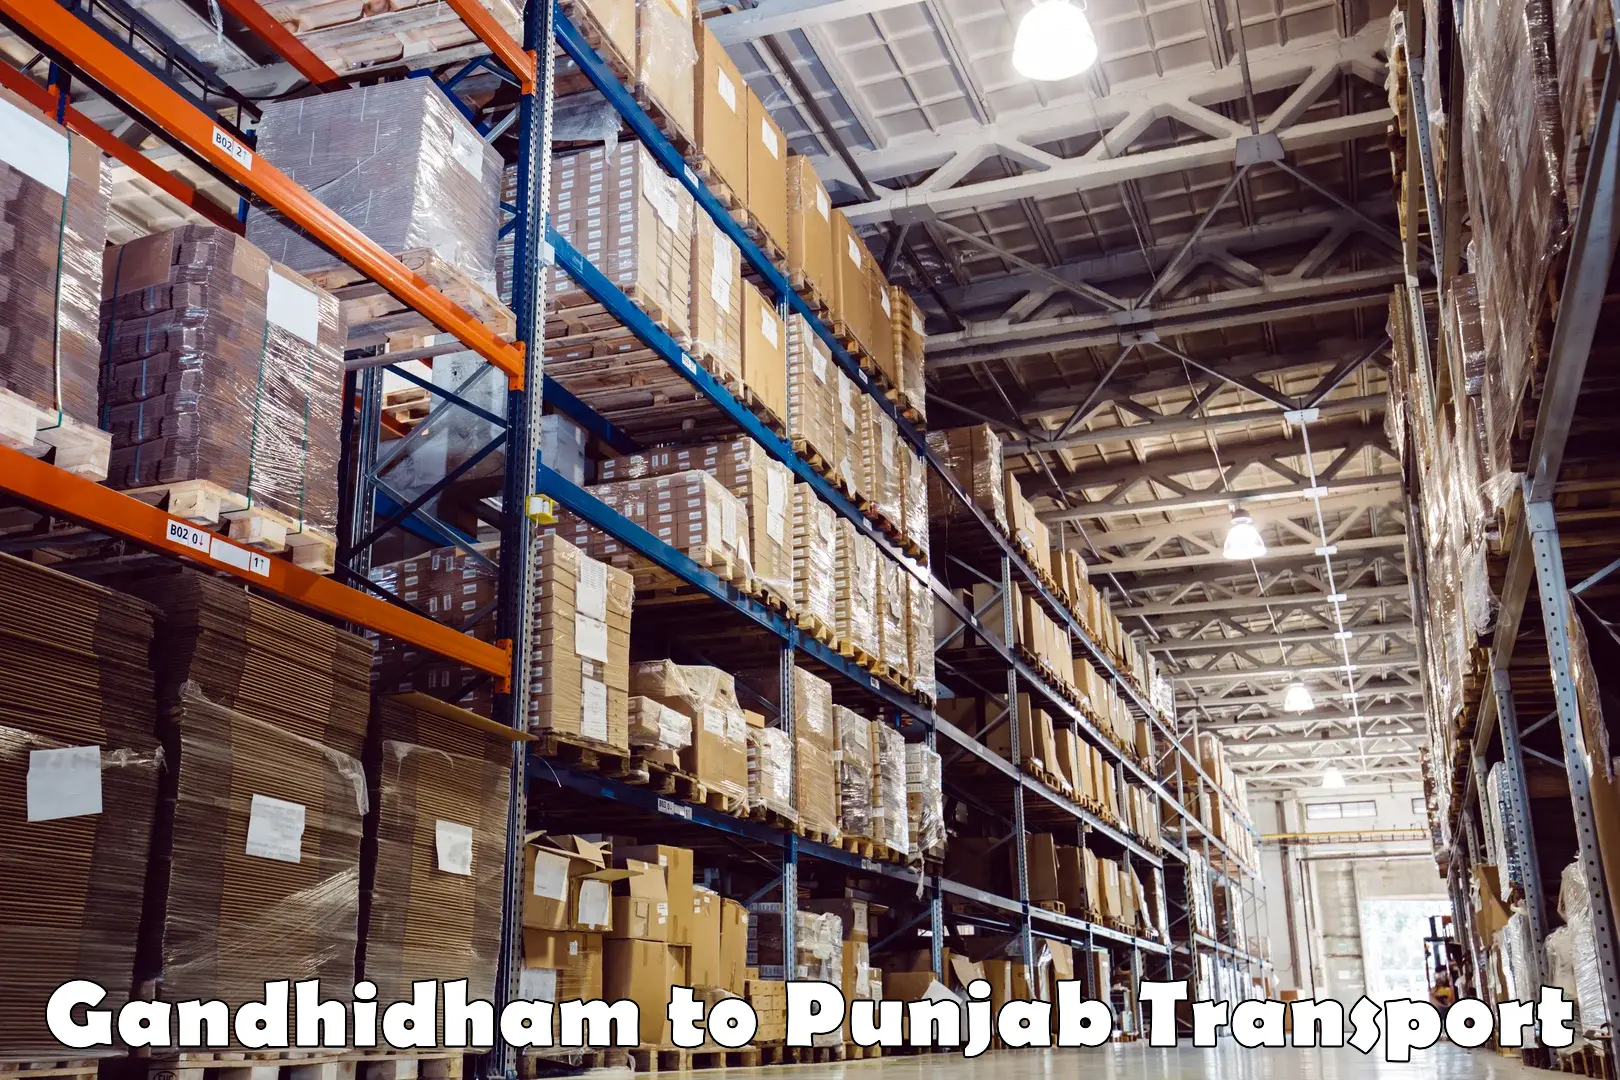 Daily parcel service transport Gandhidham to Patiala